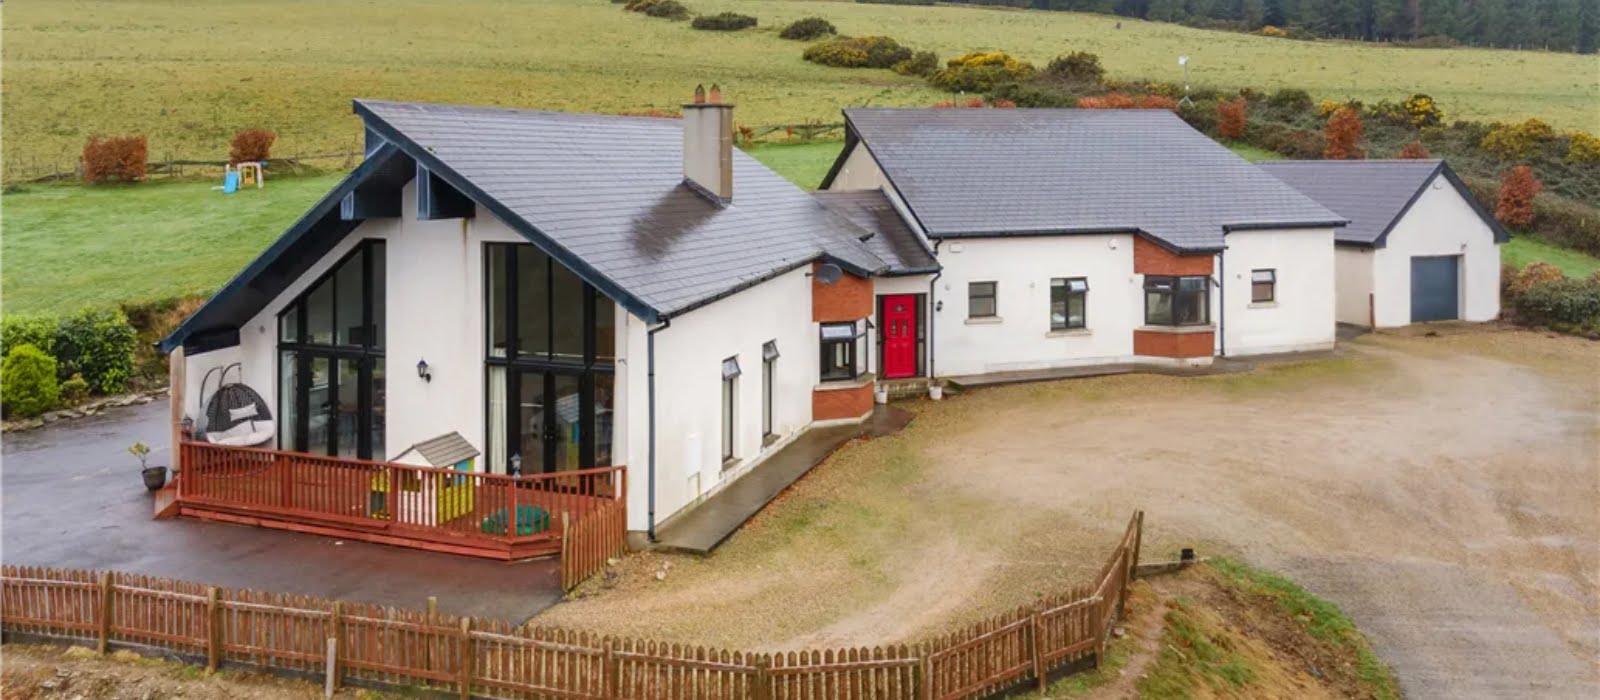 This bright and spacious Wexford home is on the market for €495,000